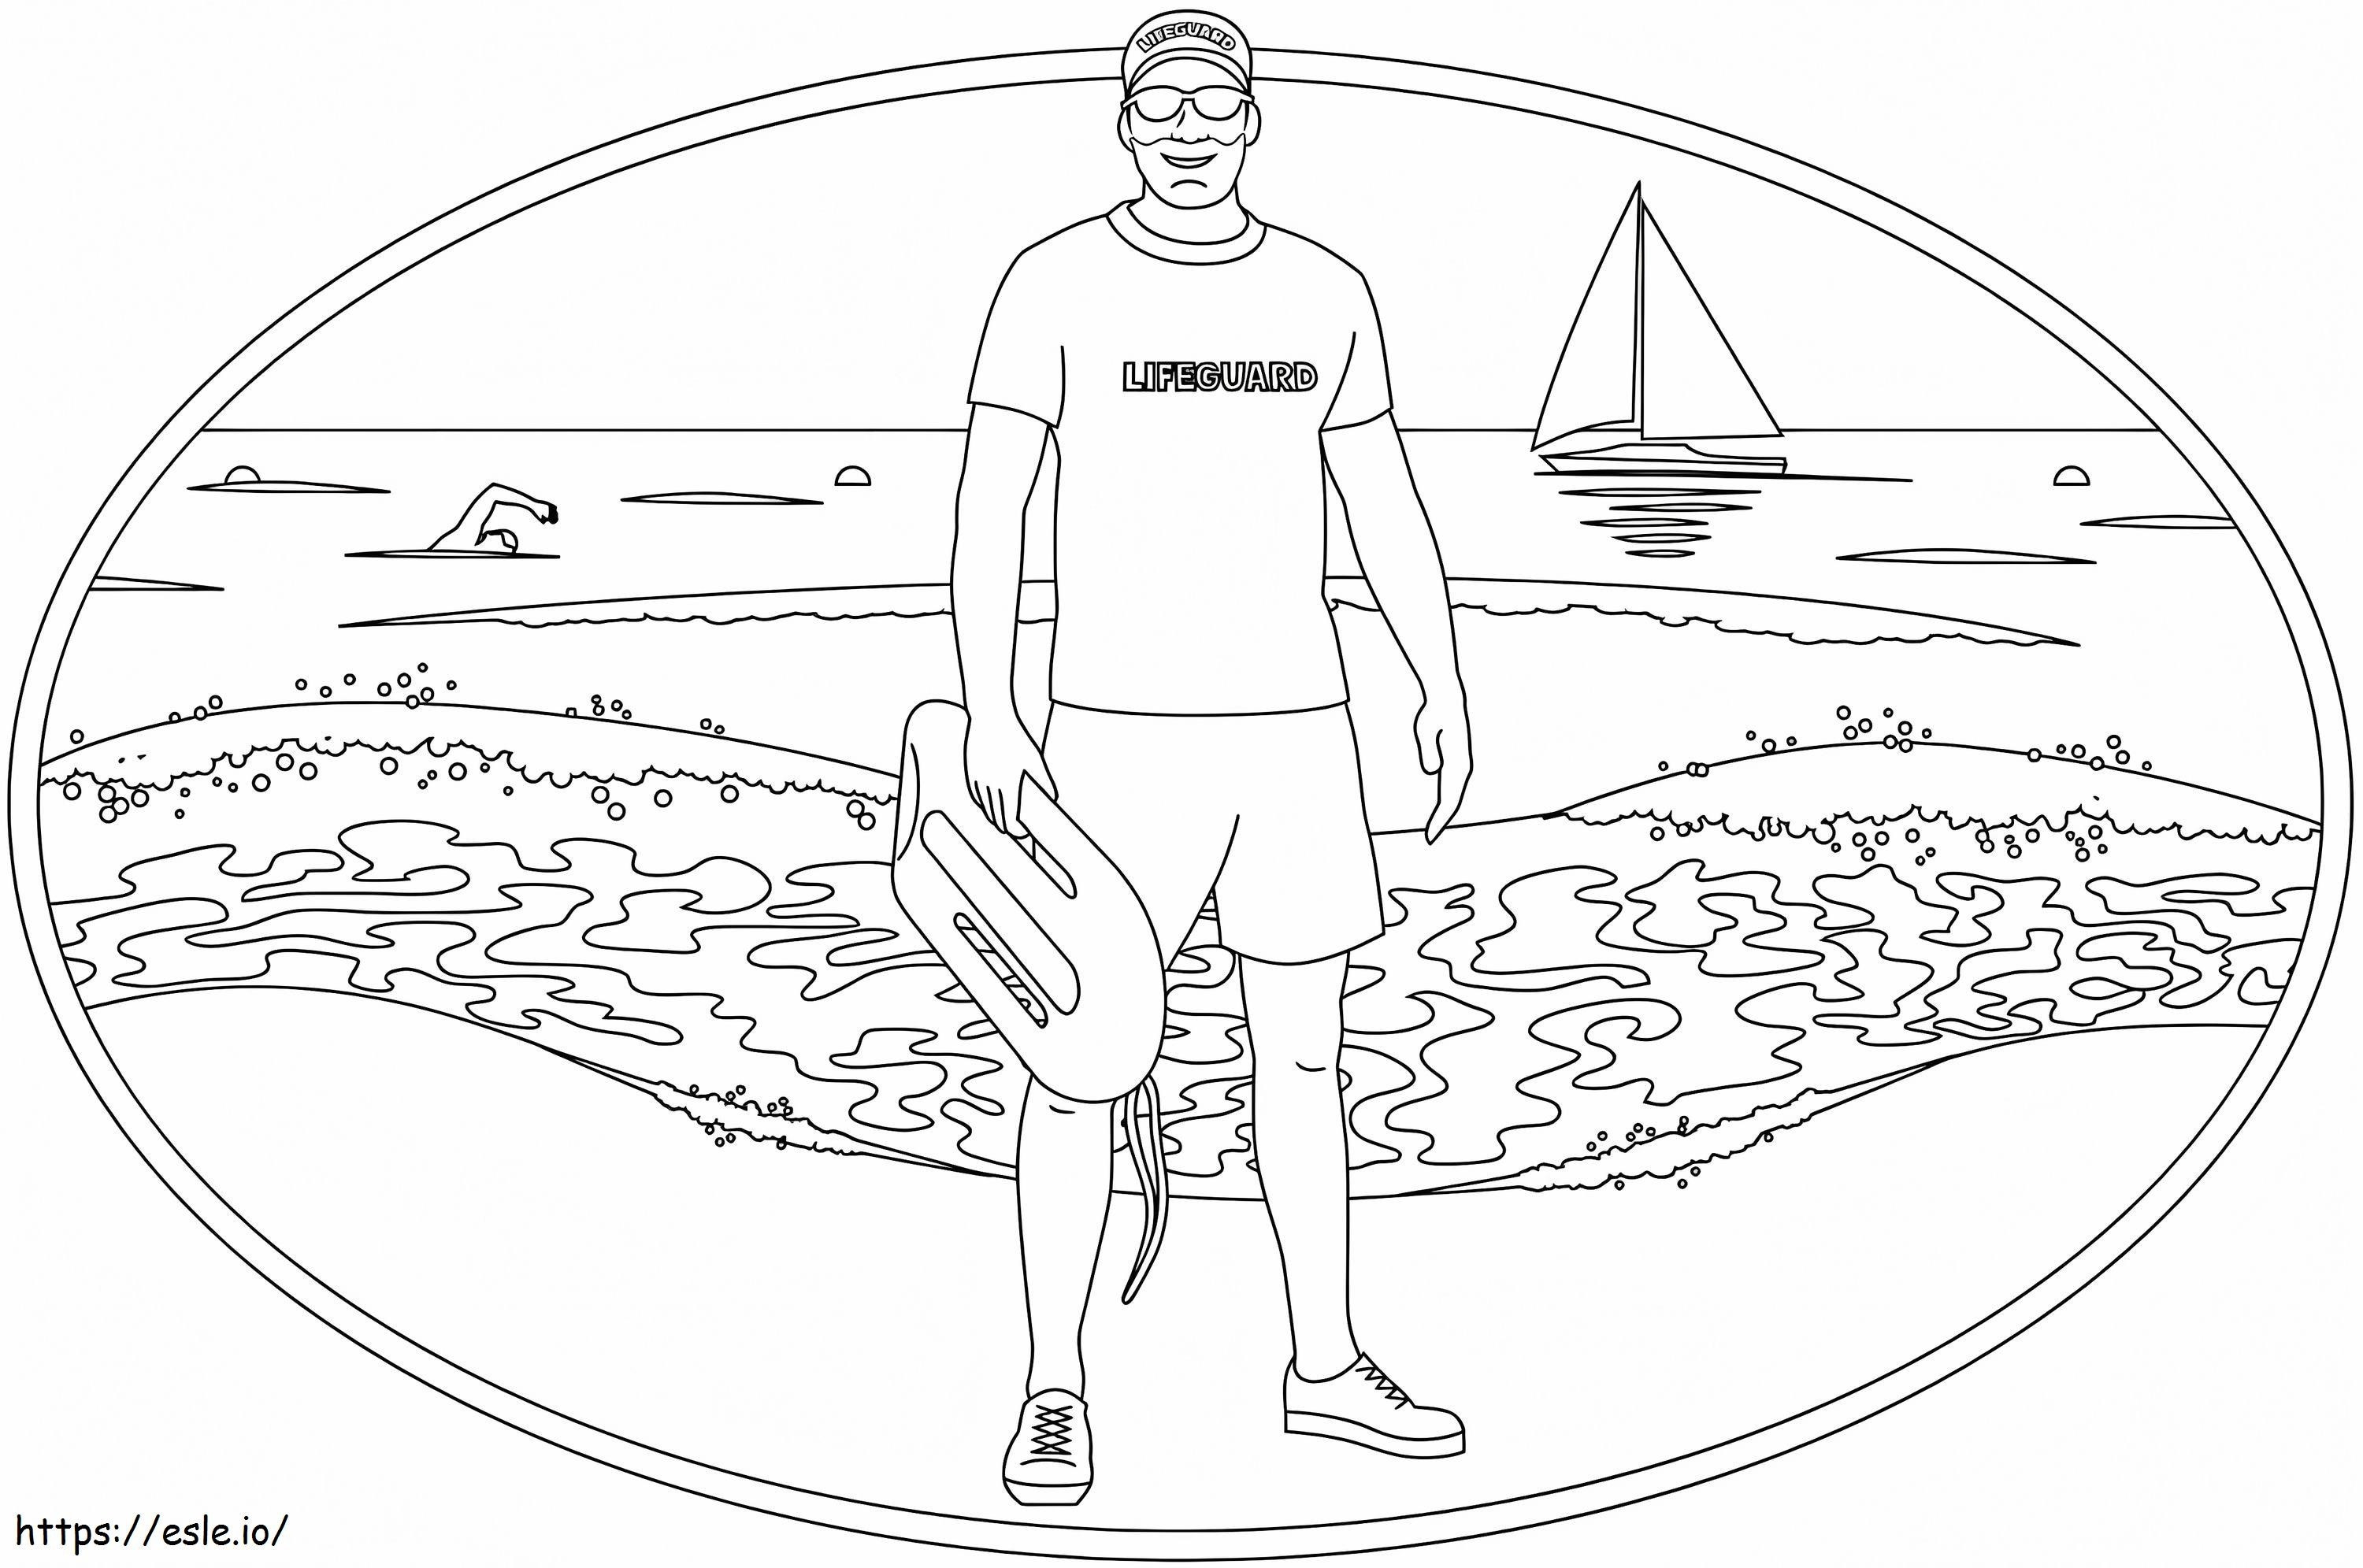 Normal Lifeguard coloring page